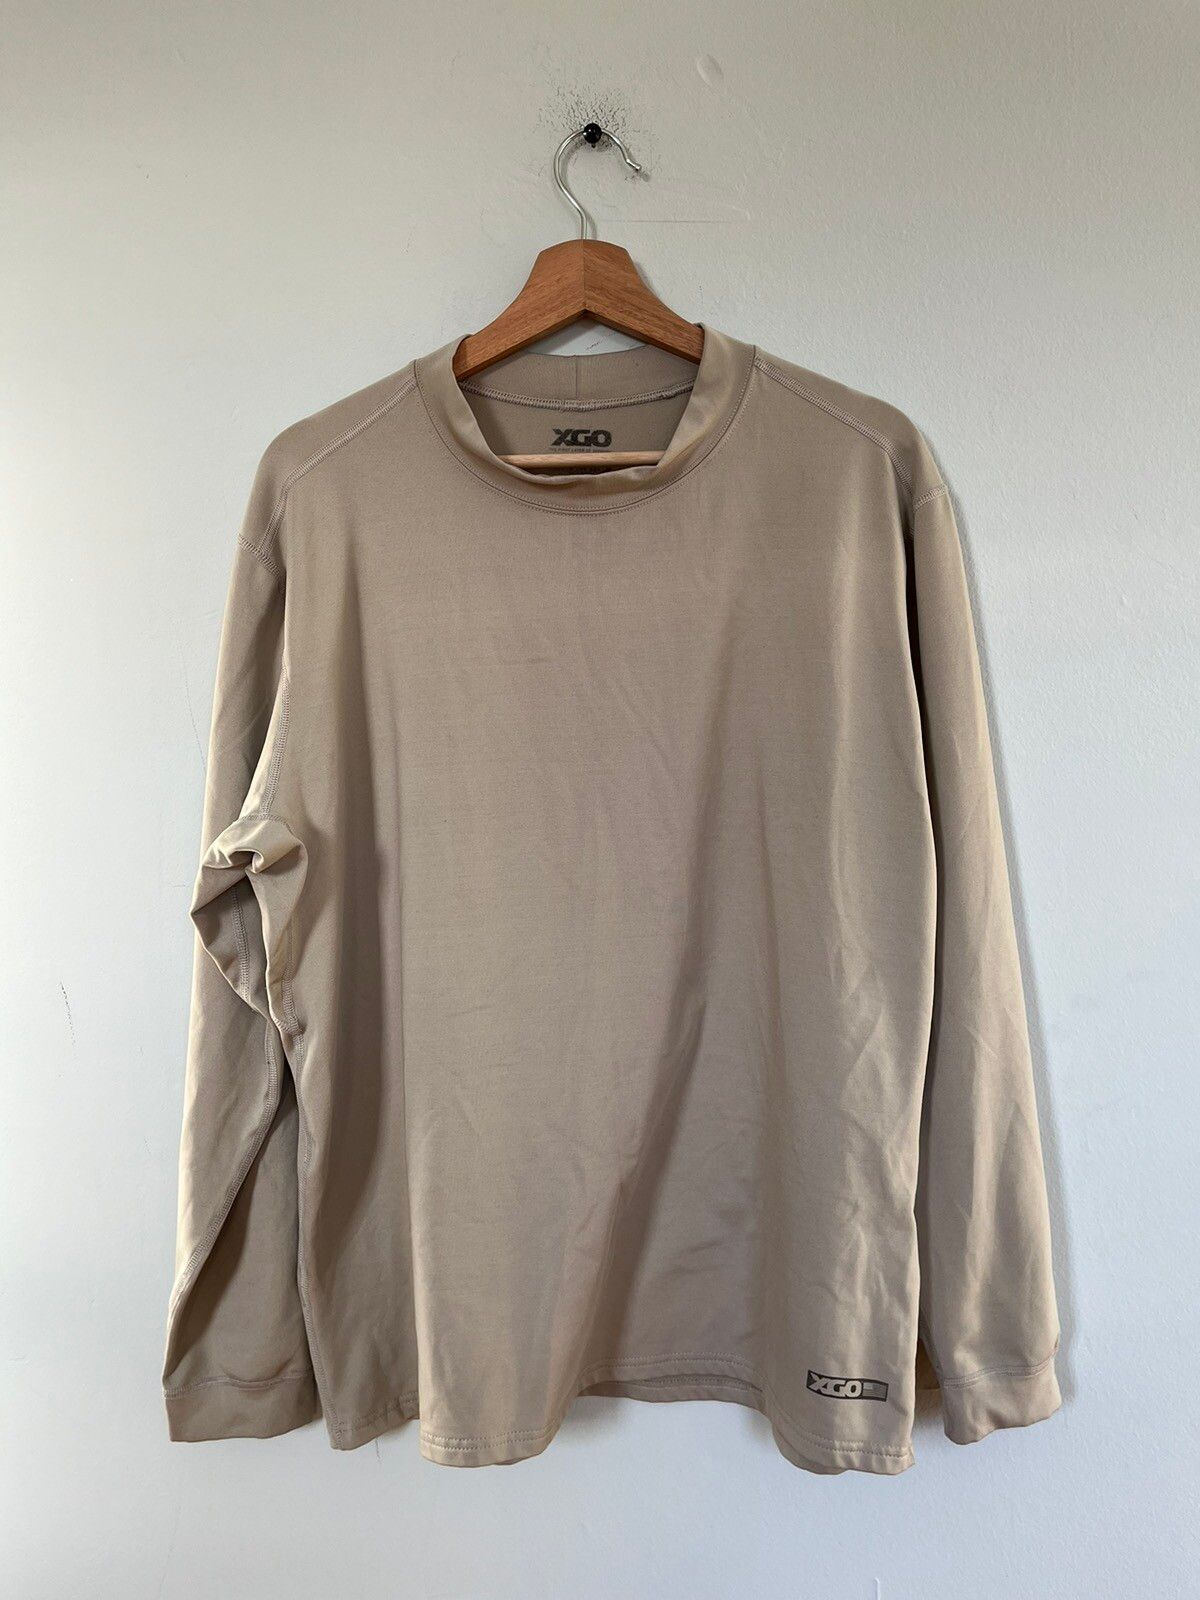 Military XGO Military Thermal Size US XL / EU 56 / 4 - 1 Preview